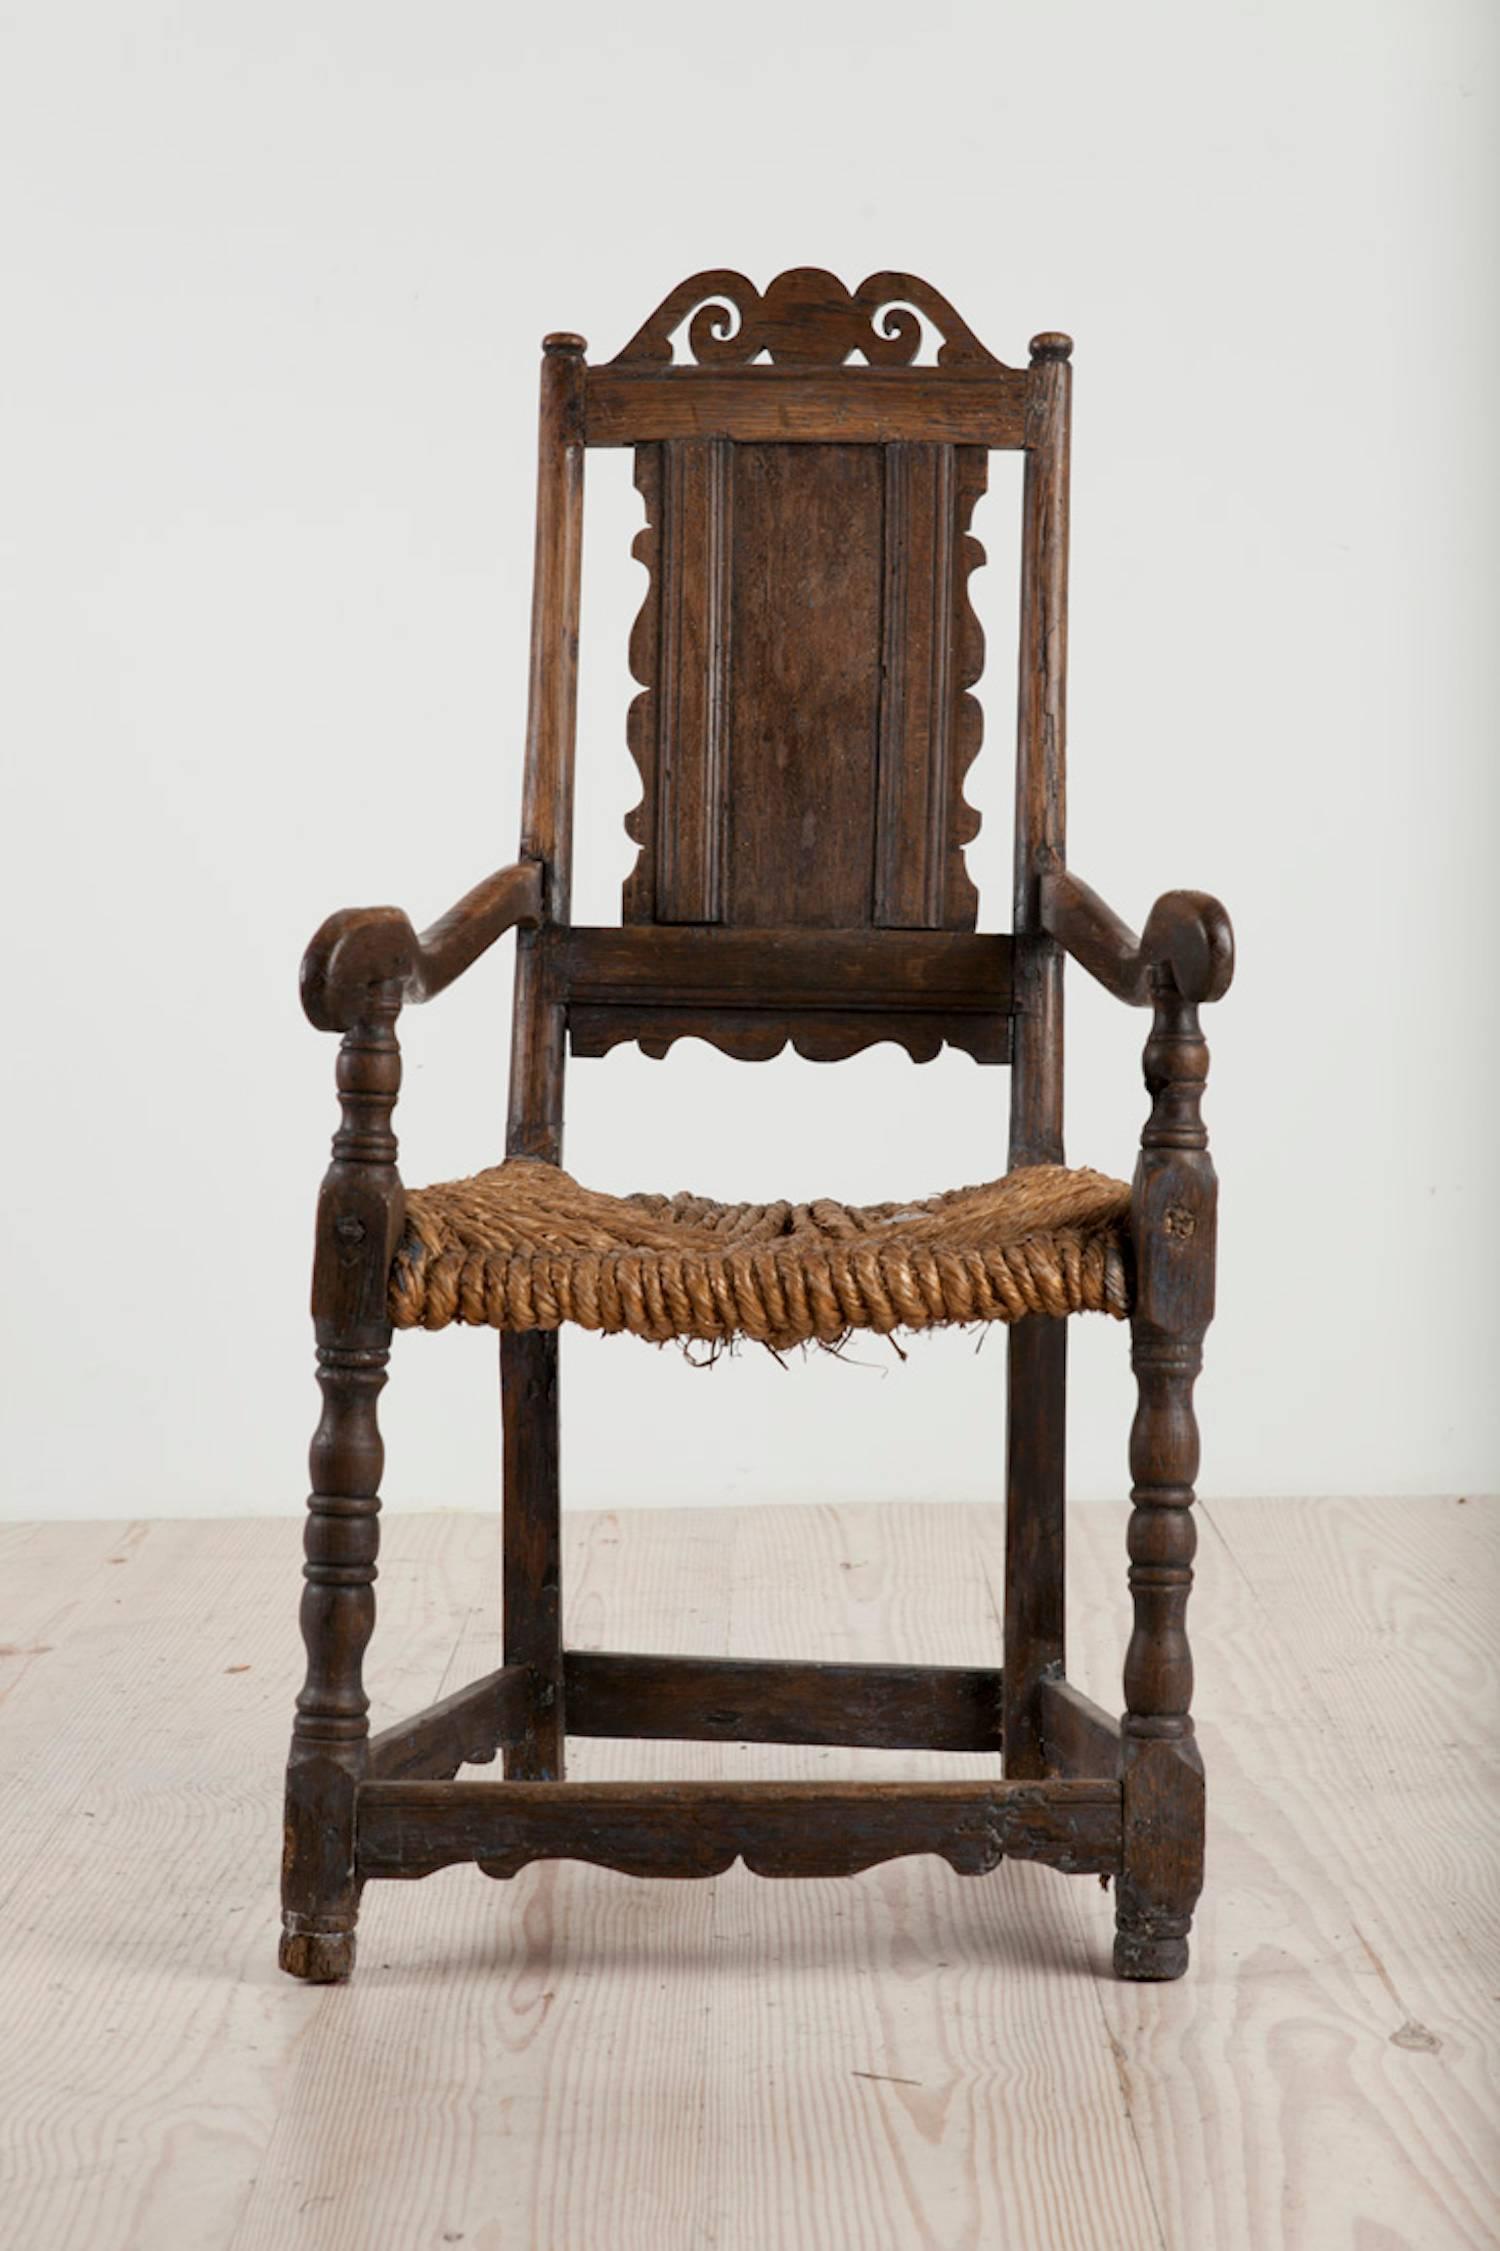 Early, Swedish allmoge poker / stove chair, origin: Blekinge, Southern Sweden, circa 1750

Provenance: Private Manor House, Sweden

These chairs were used by women to sit in / near the stove while cooking. (See attached photograph)
All original